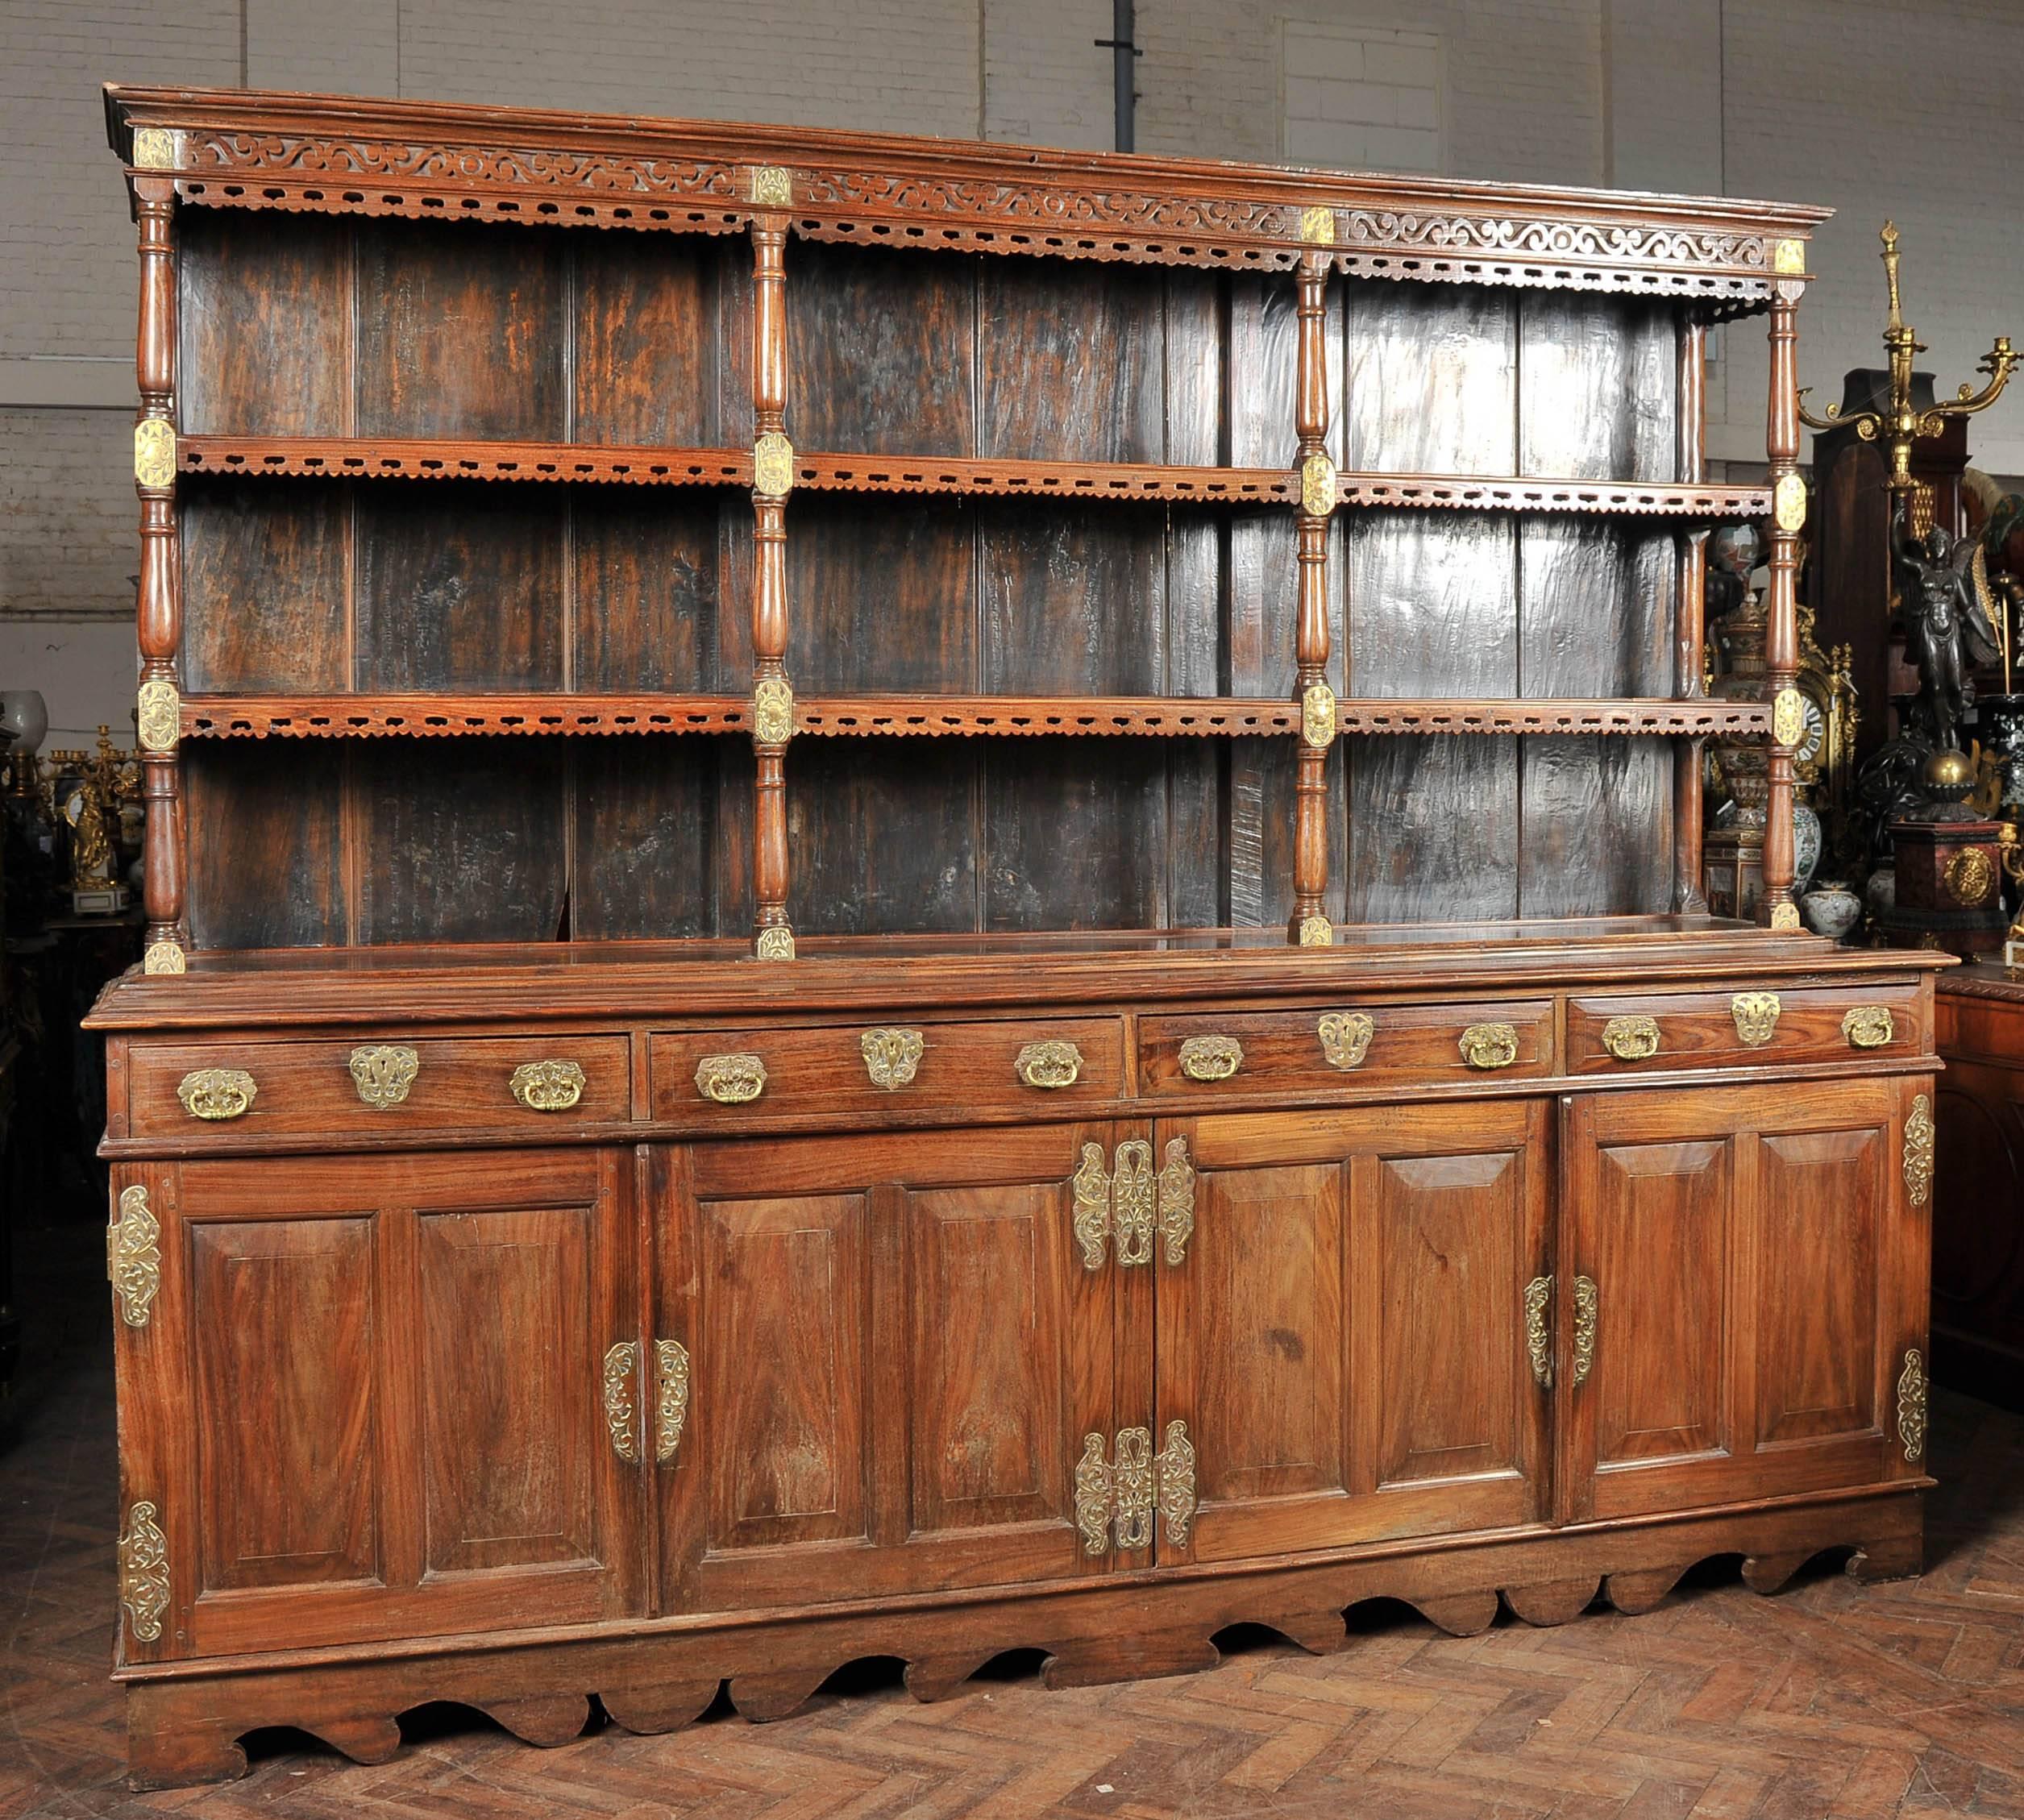 A rare early 19th century Ceylonese Padouk wood dresser, having wonderful brass sunburst and leaf mounts. The cornice with s scrolling blind fretwork above three shelves each with pierced aprons. Above four drawers and four recessed panelled doors